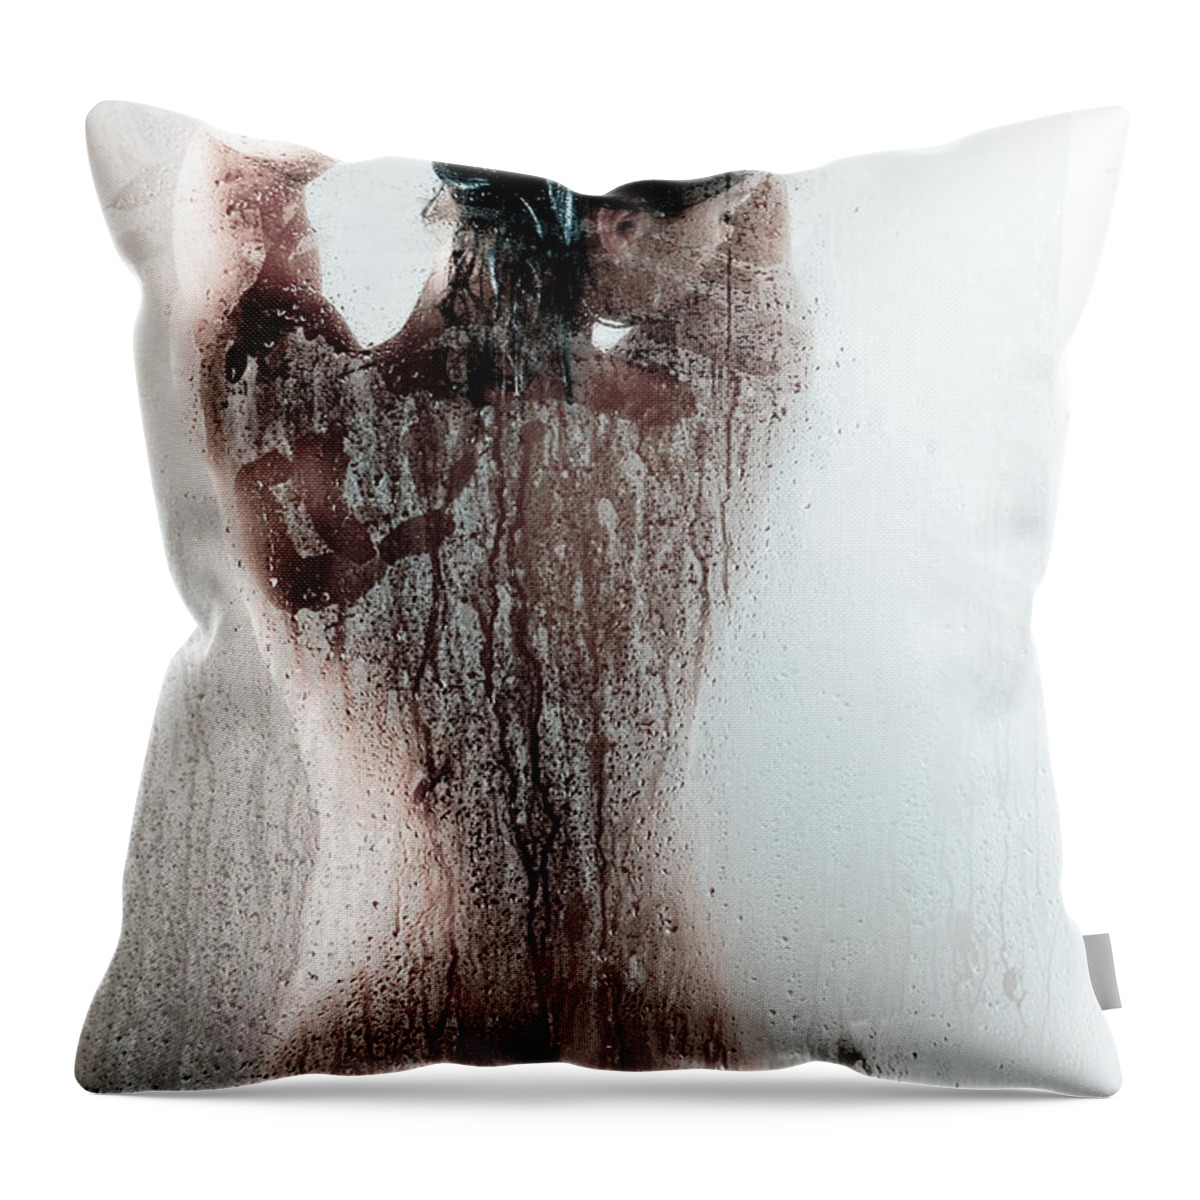 Ass Throw Pillow featuring the photograph Looking Through the Glass by Jt PhotoDesign